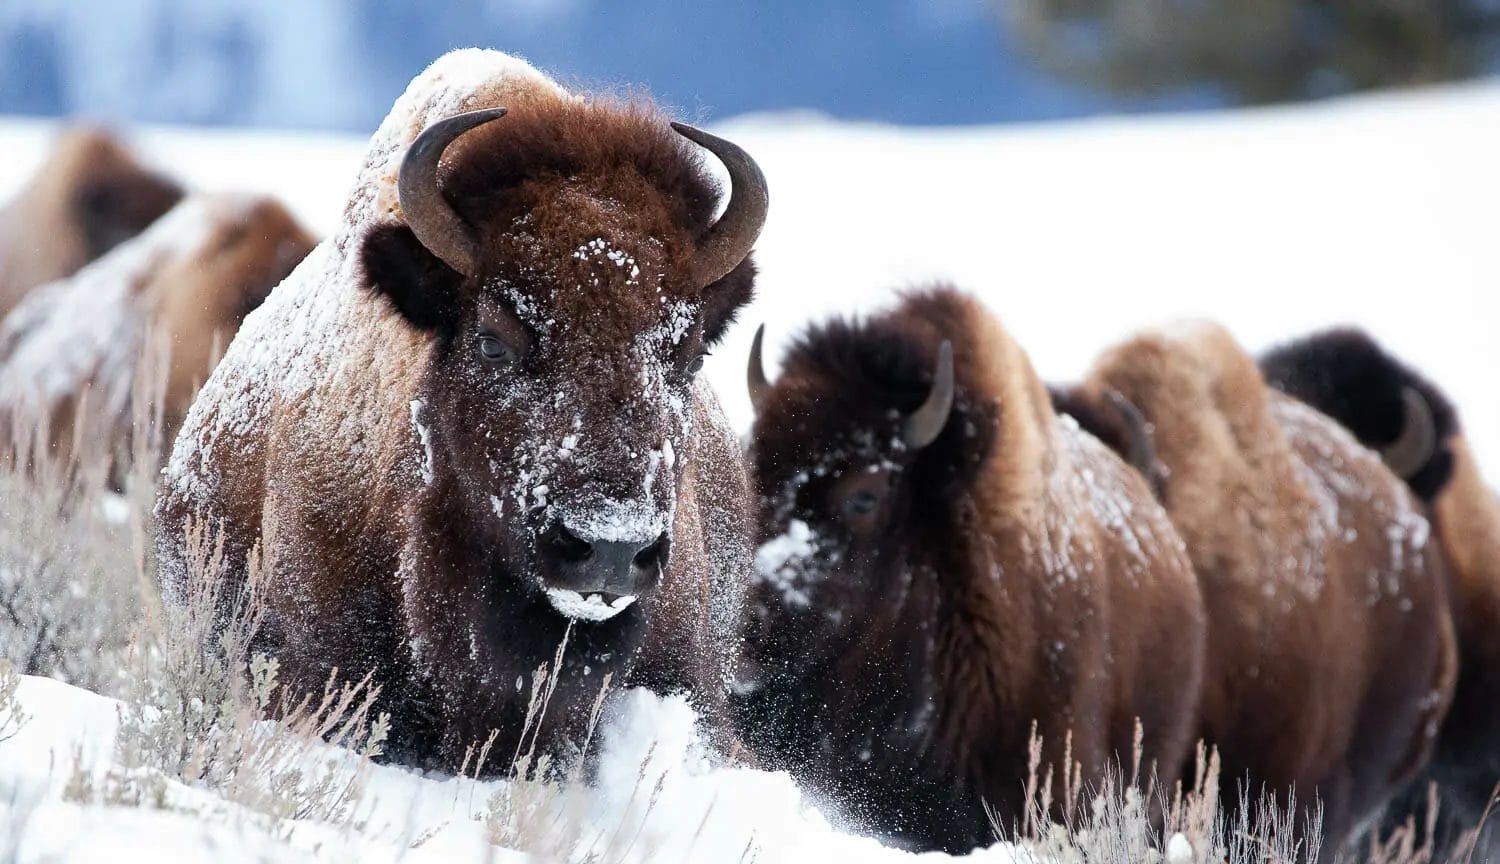 A herd of bison with snow on their faces walking through a snowy landscape.